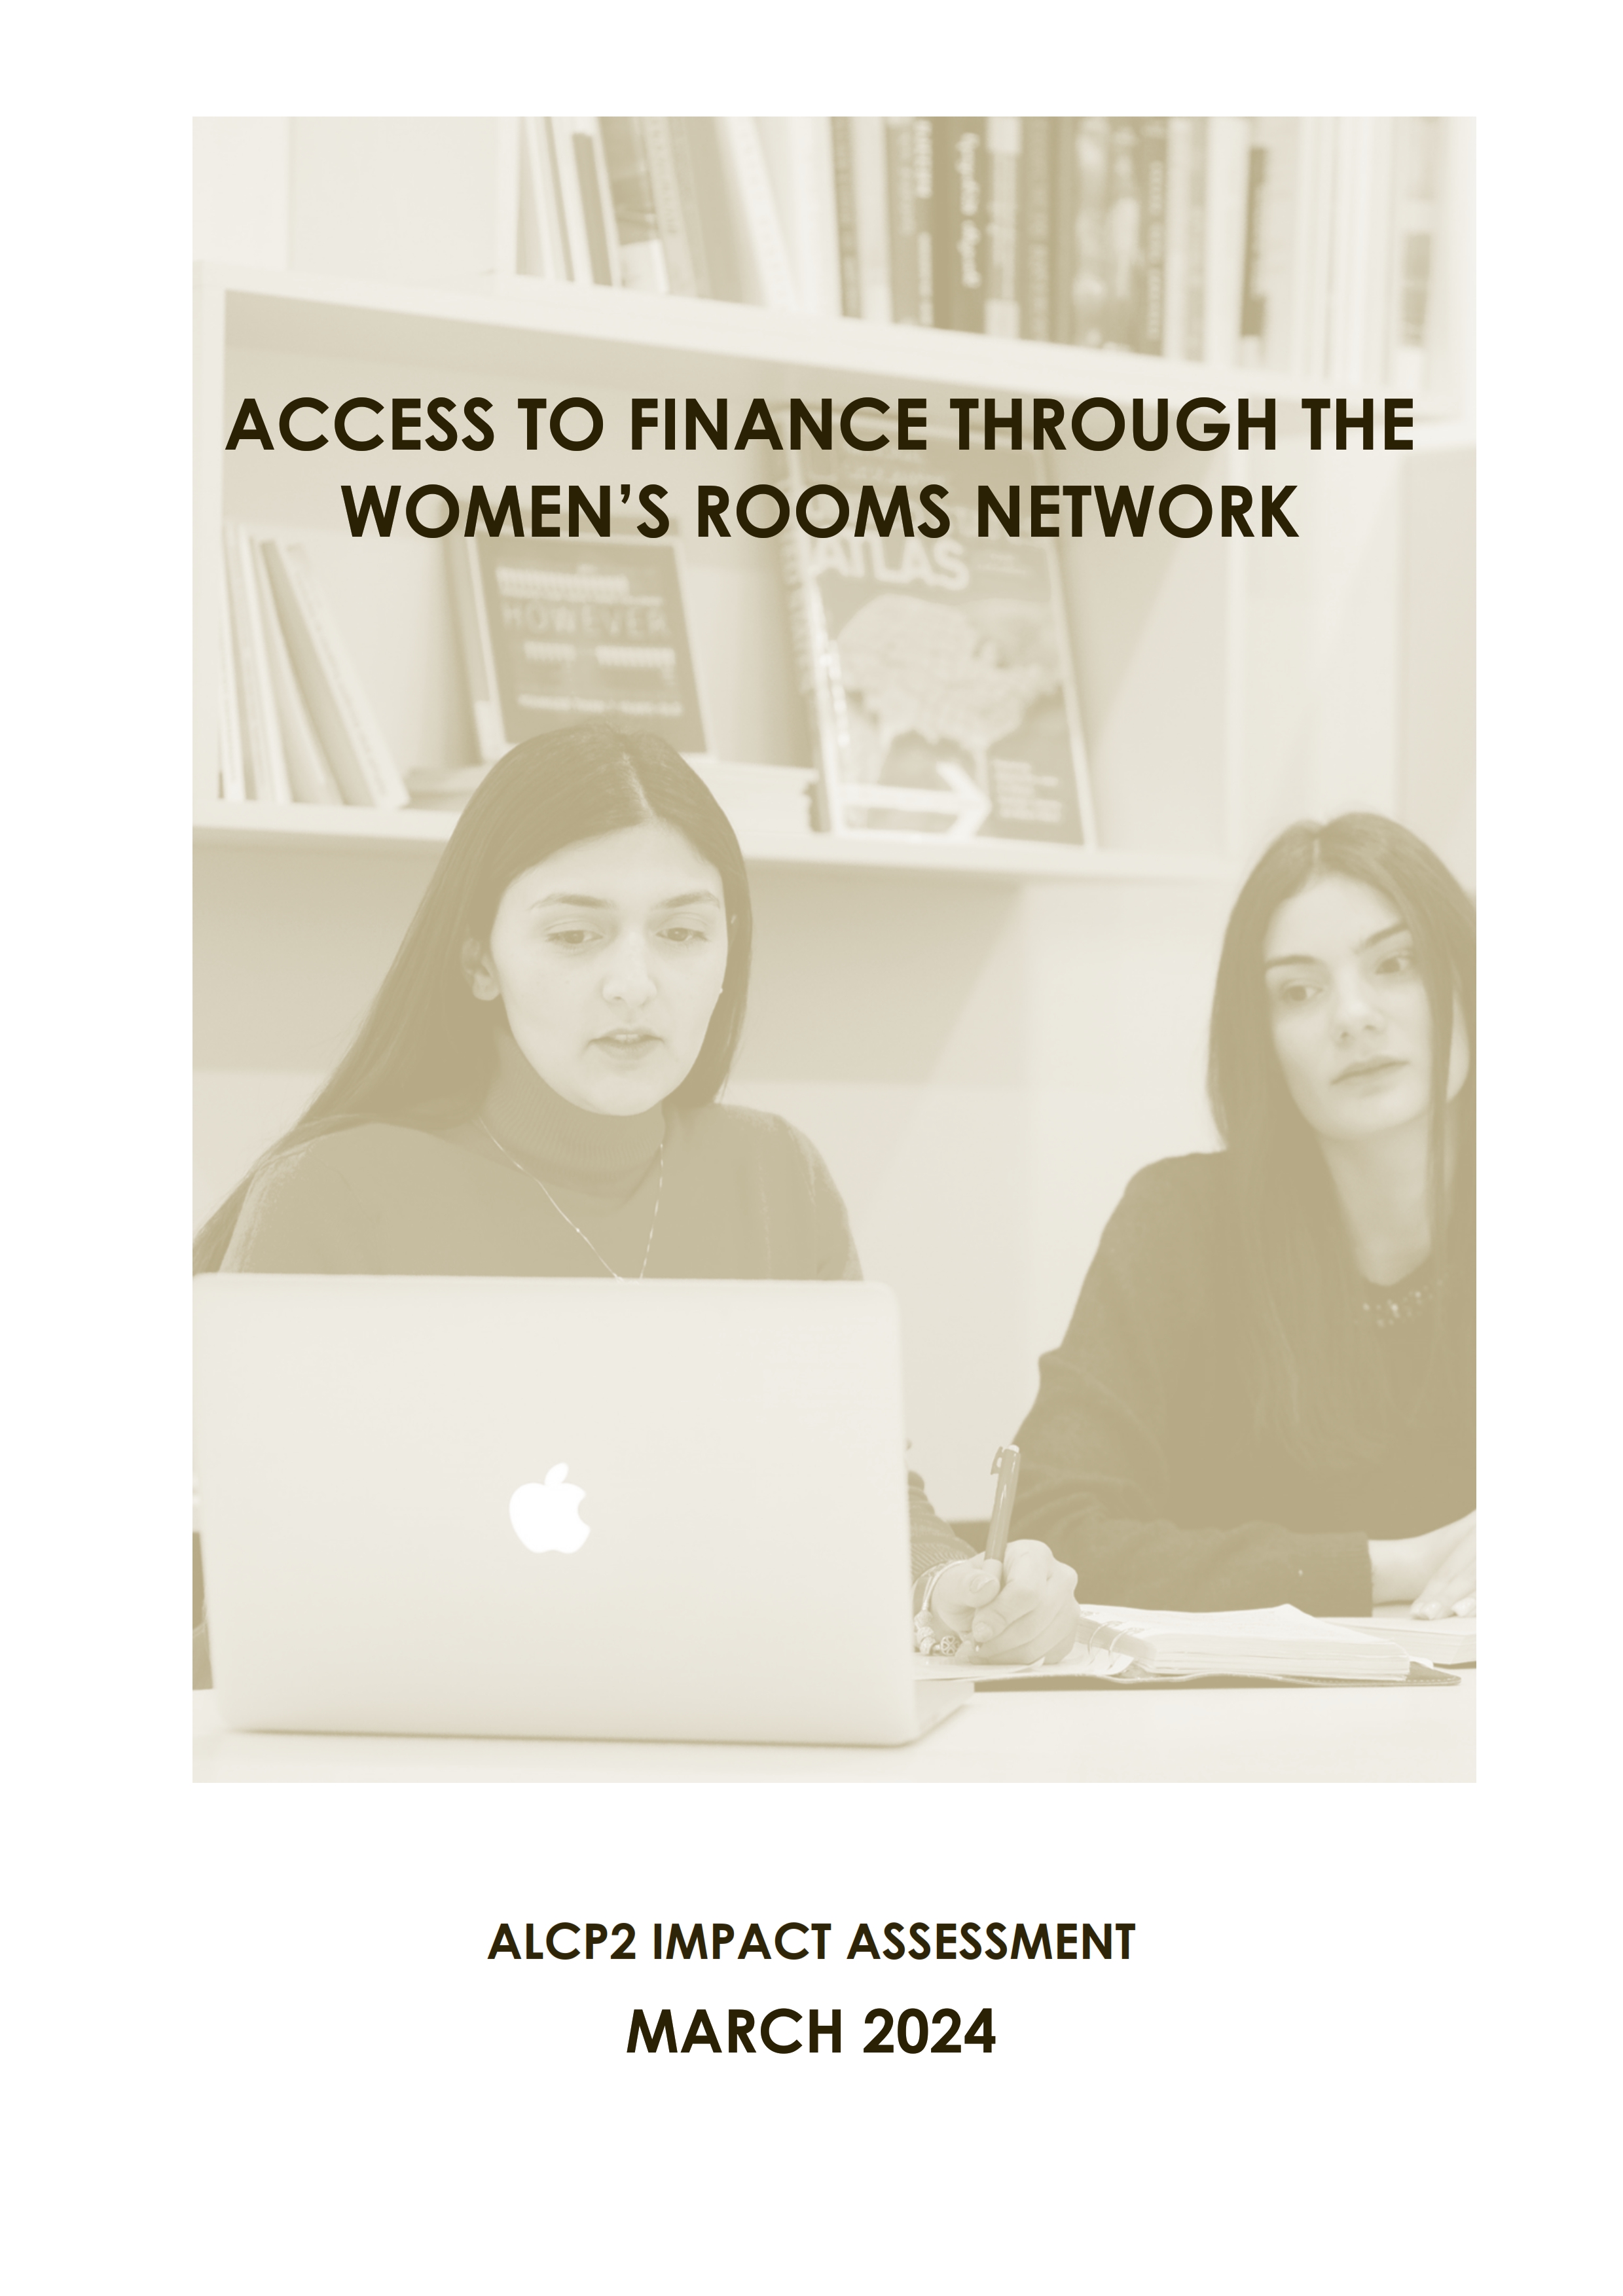 ACCESS TO FINANCE THROUGH THE WOMEN’S ROOMS NETWORK   MARCH 2024